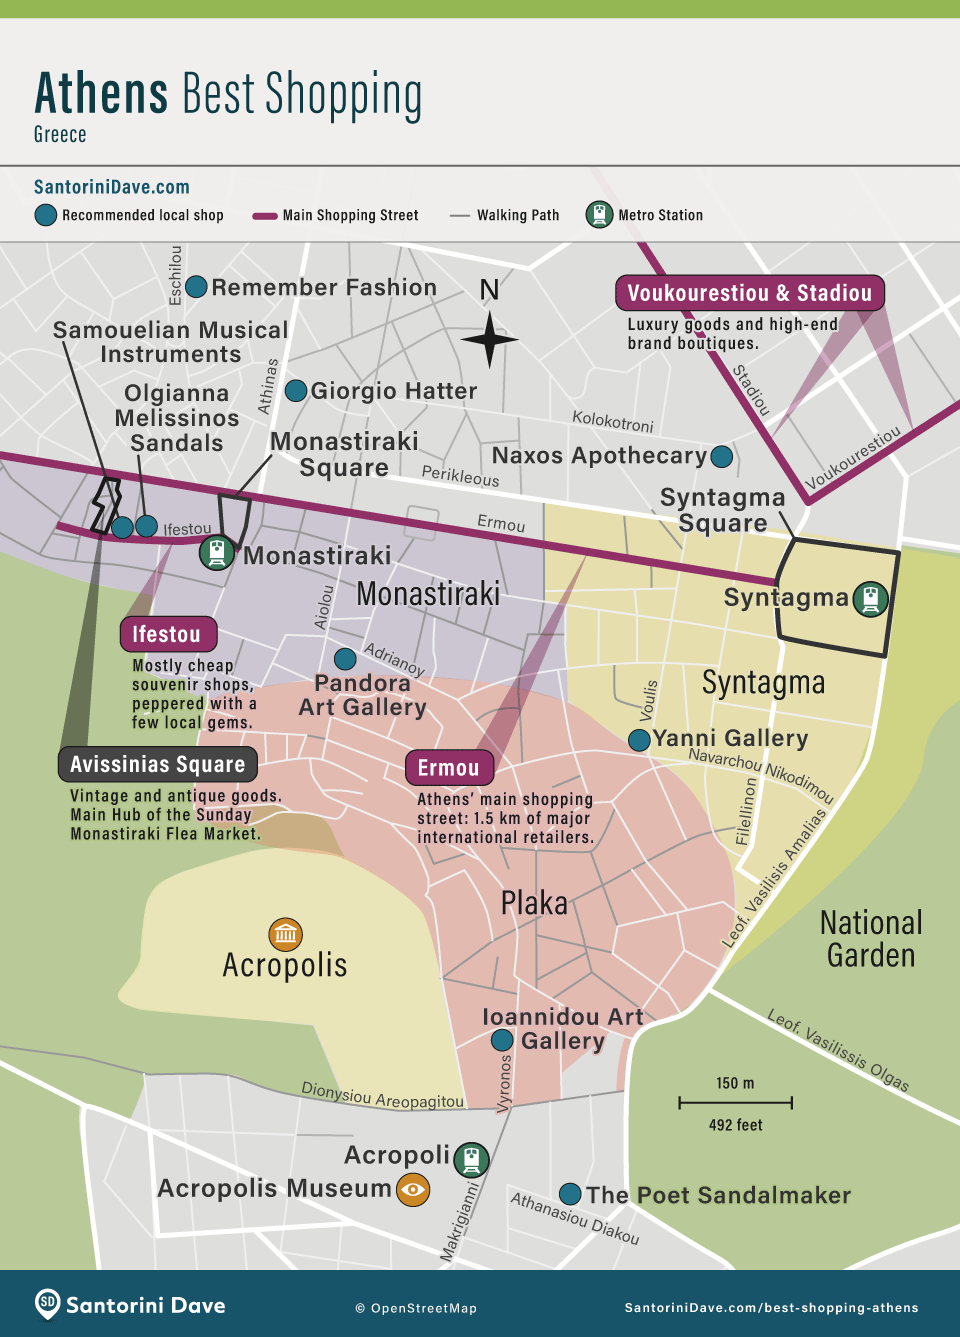 Map showing the locations of the best shopping areas and local shops in Athens, Greece